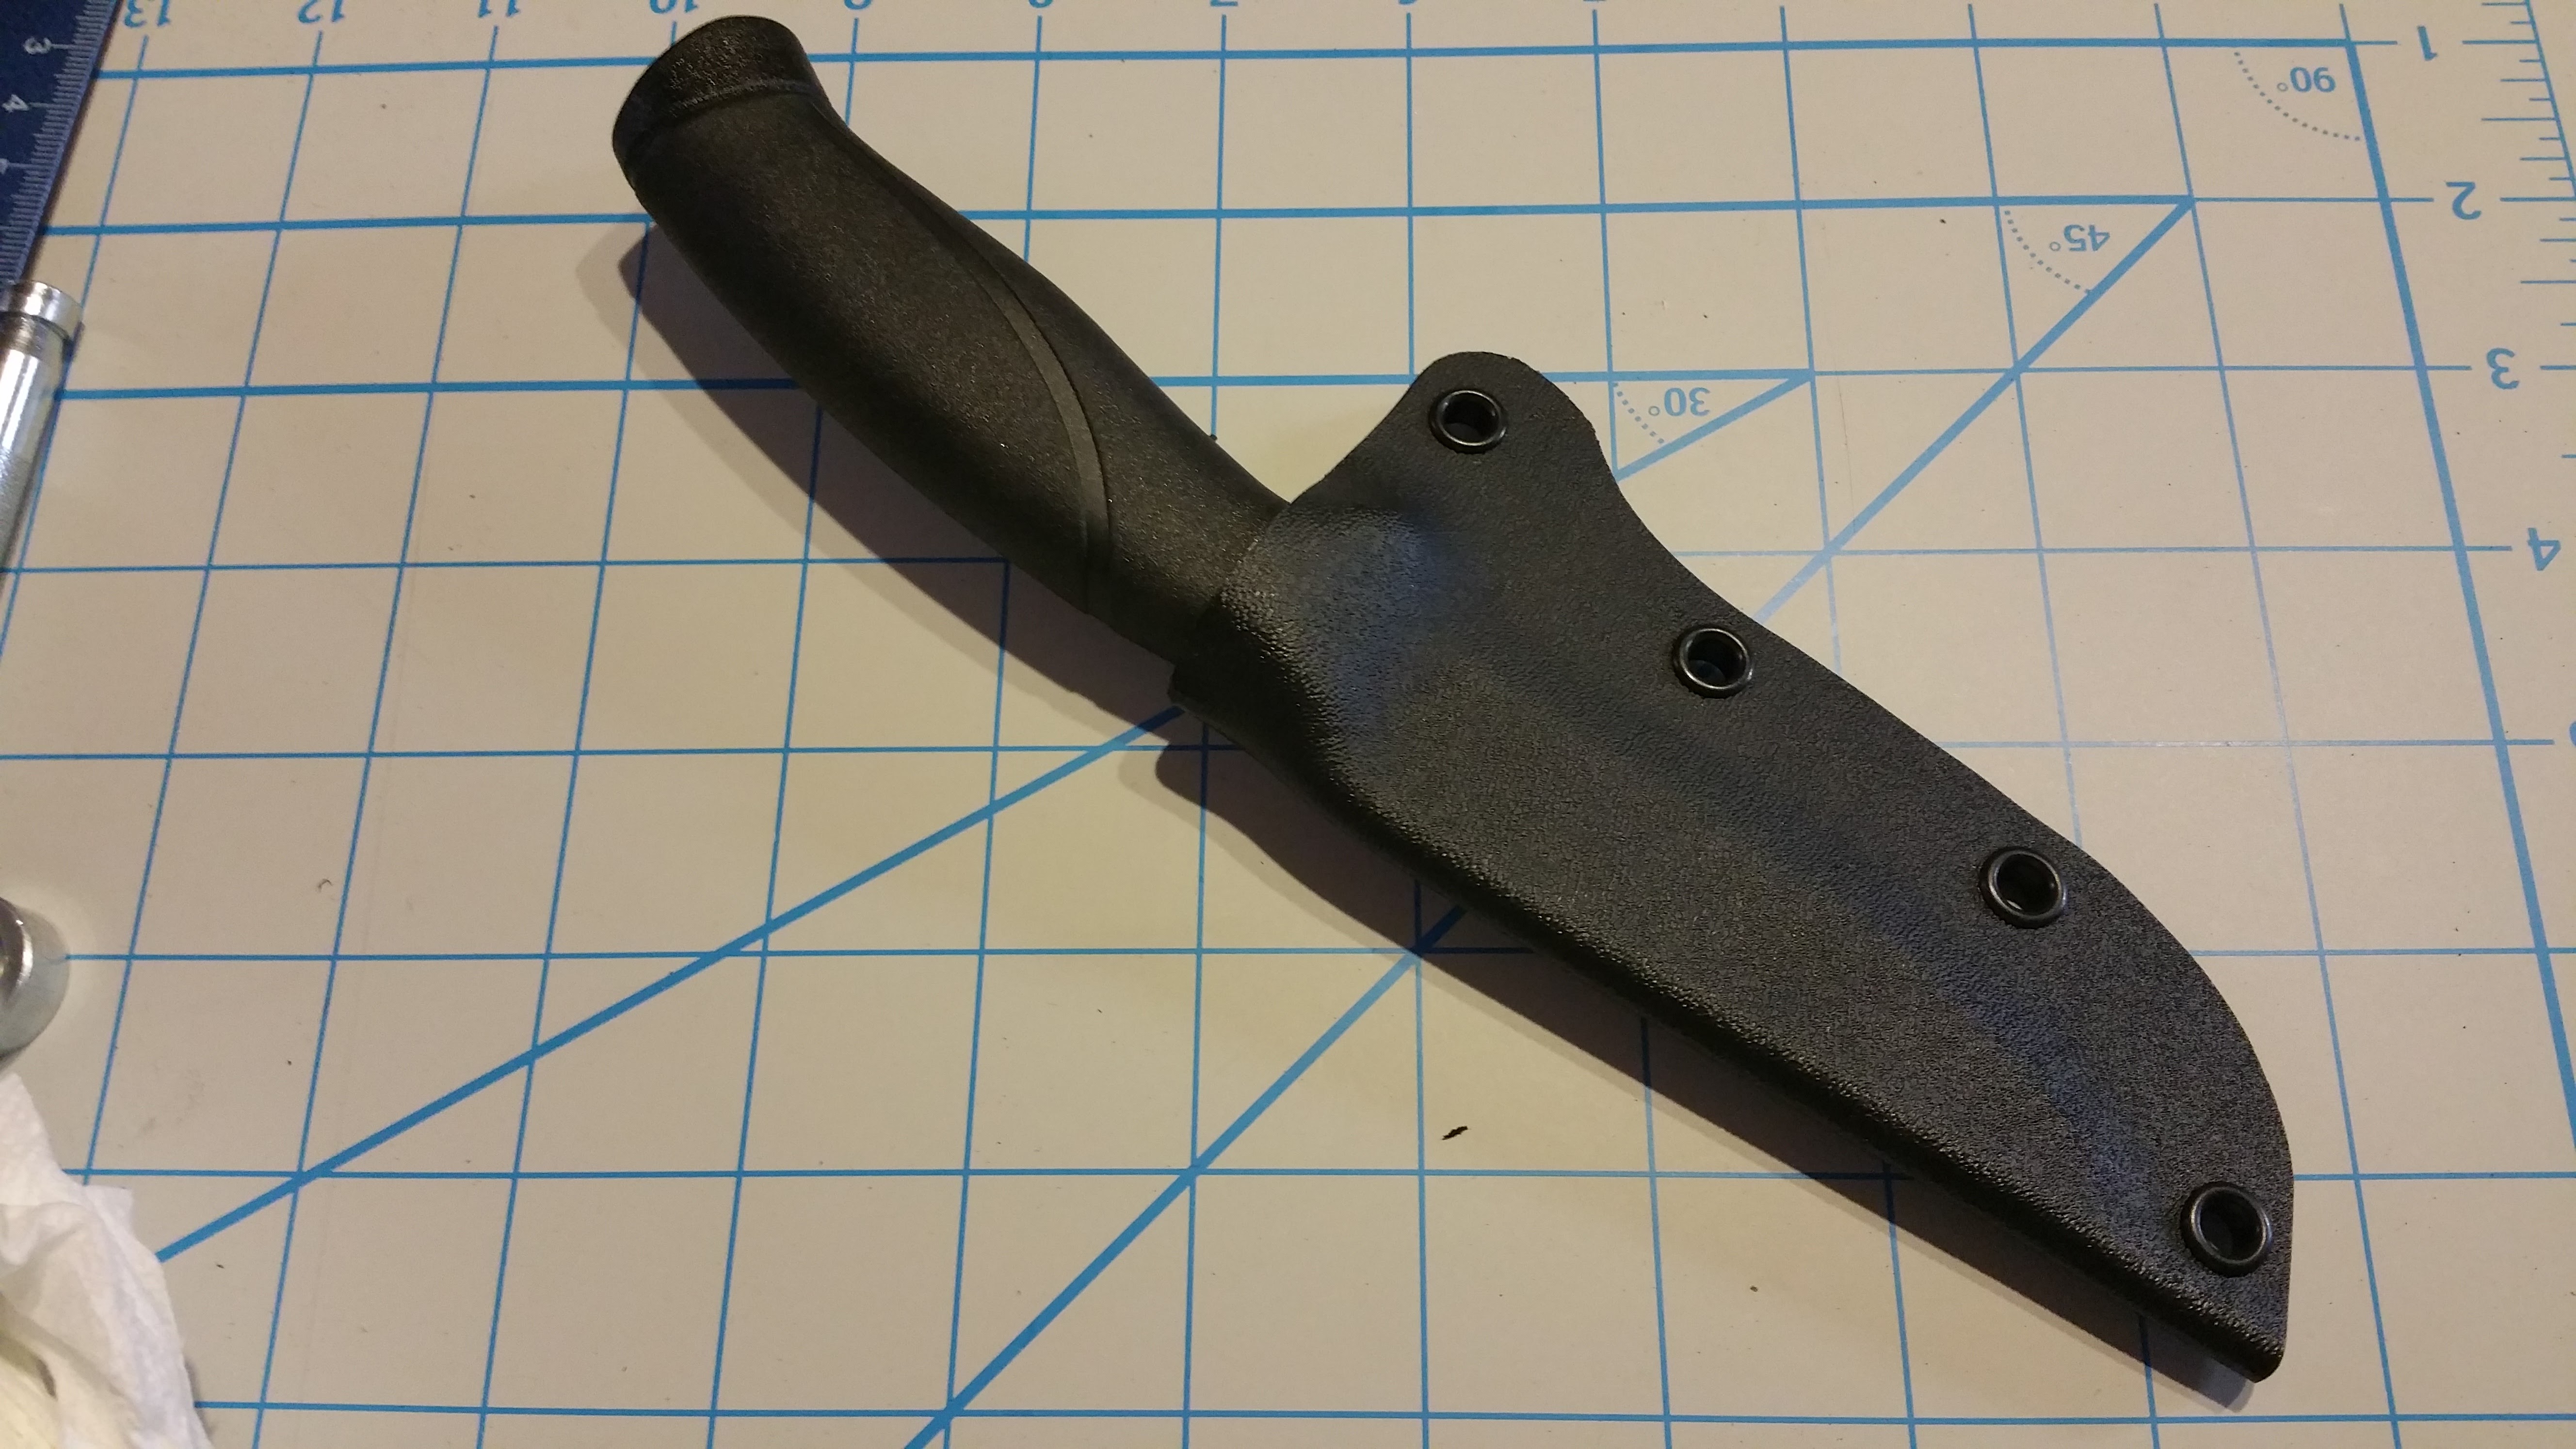 How to Make a Kydex Knife Sheath & Everything Else You Need to Know About  Getting Started in Kydex